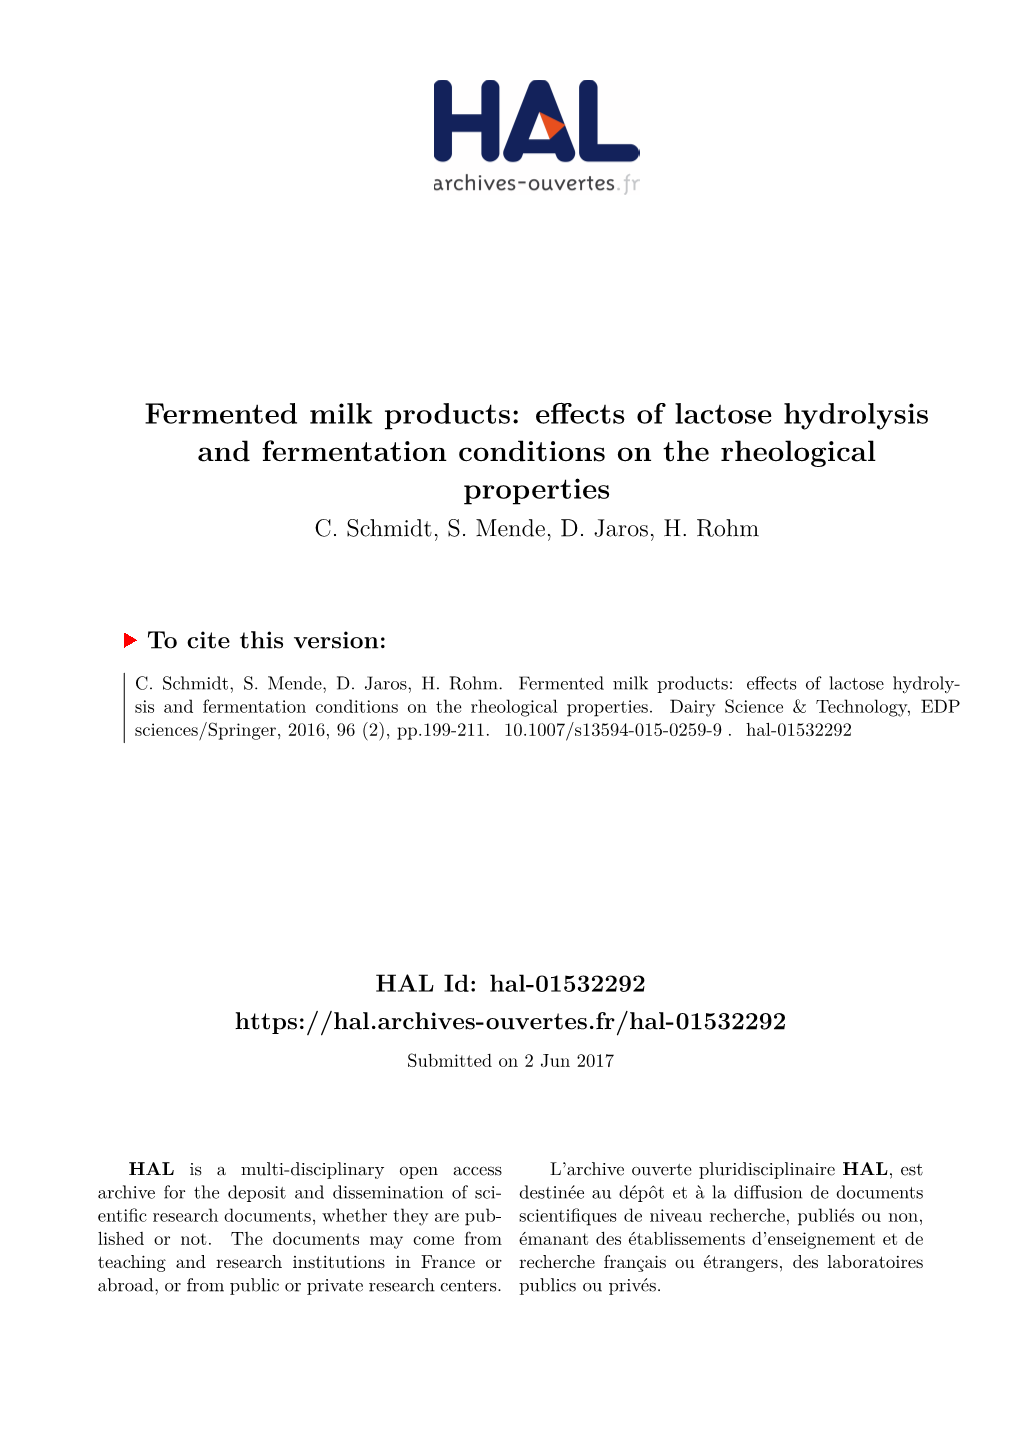 Effects of Lactose Hydrolysis and Fermentation Conditions on the Rheological Properties C